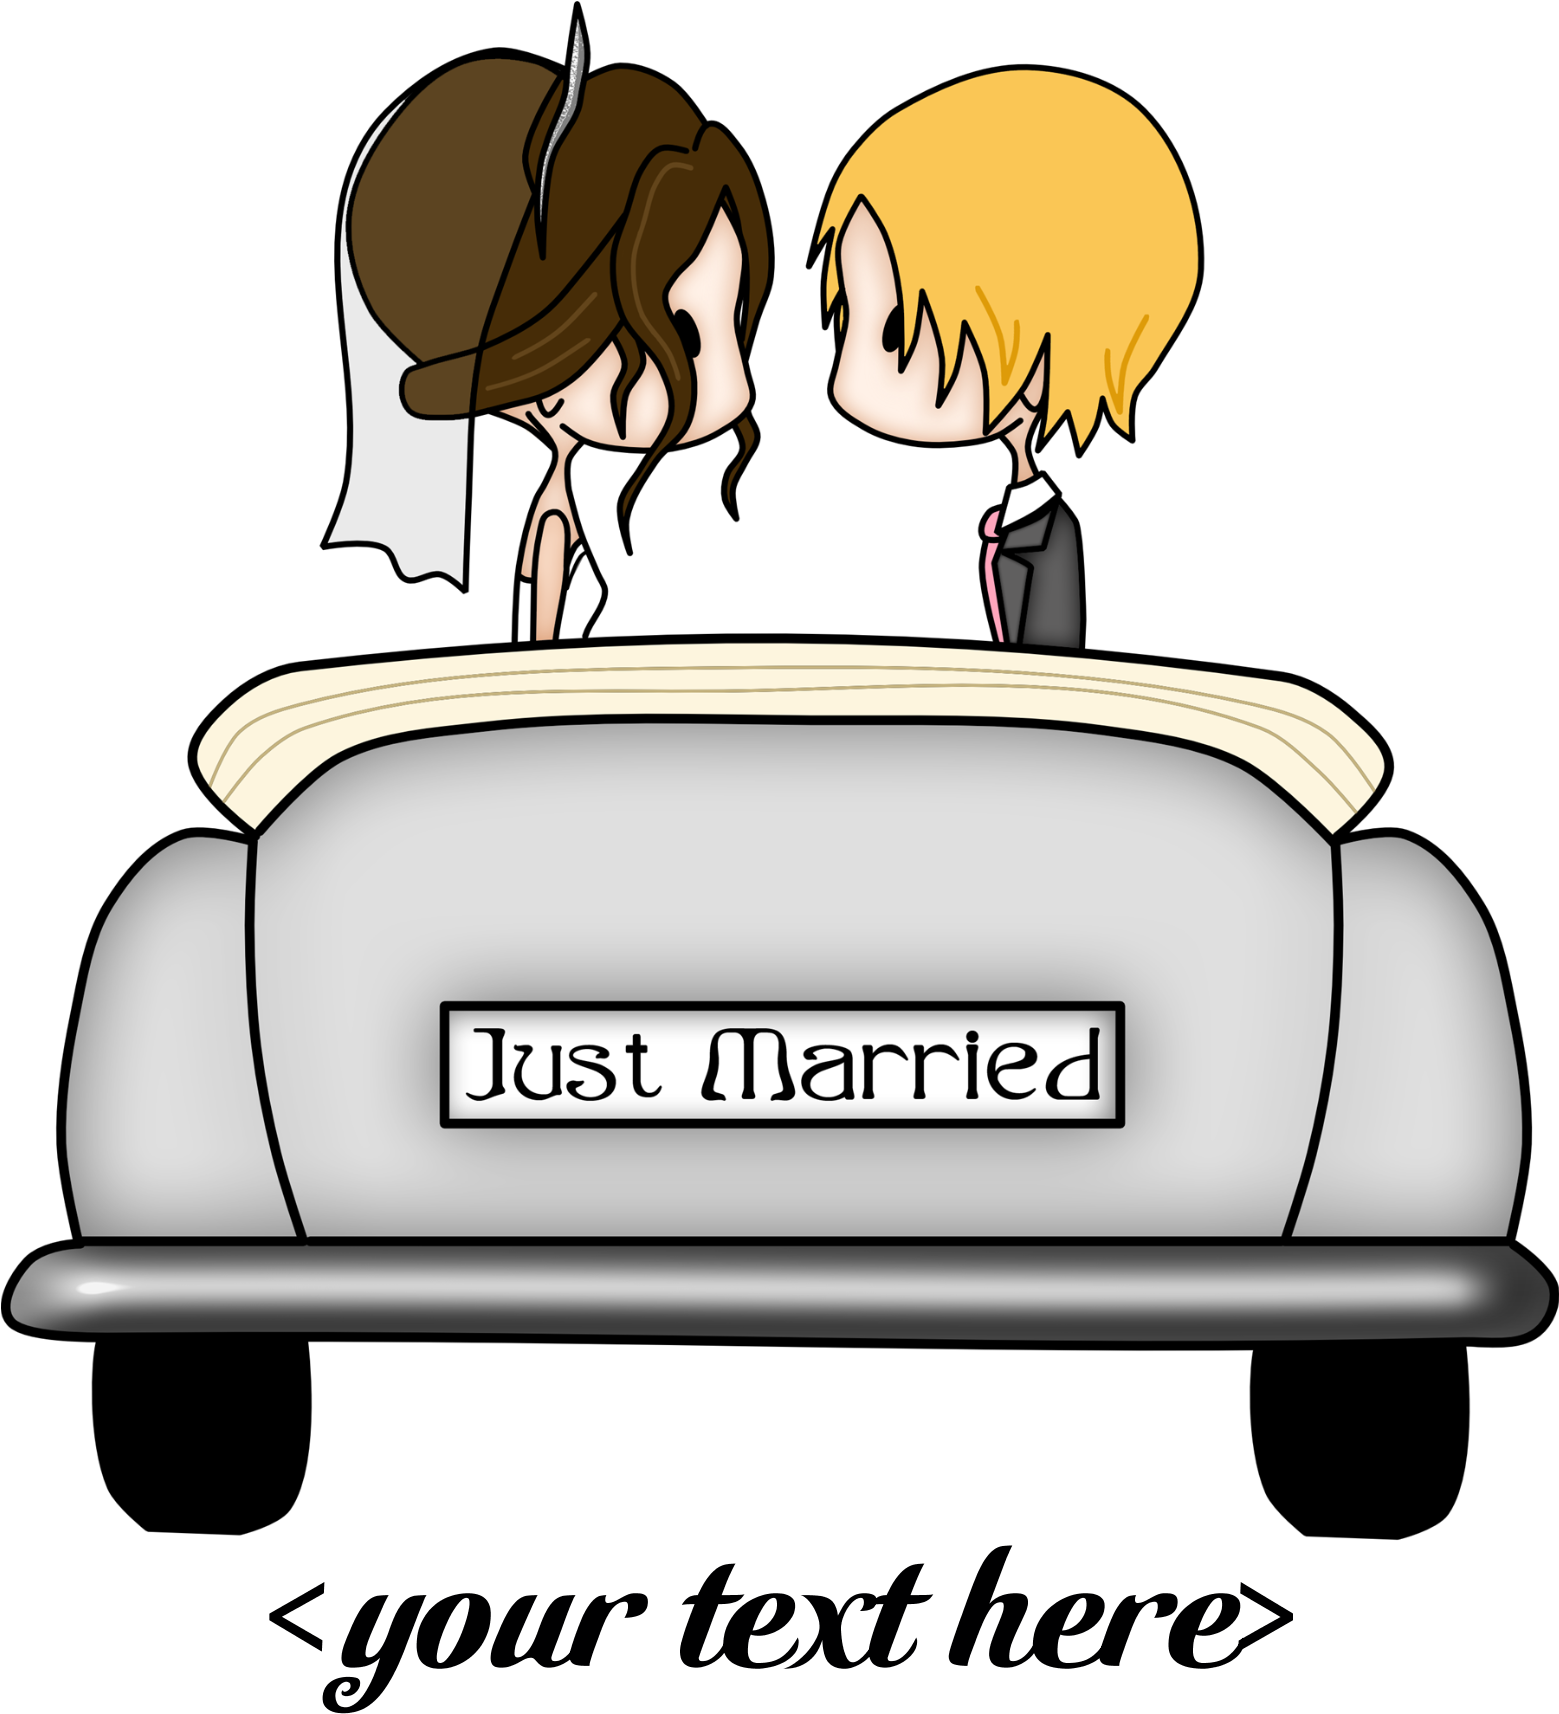 https://www.kindpng.com/picc/b/117-1172220_loading-car-clipart-11-auto-just-married-car.png